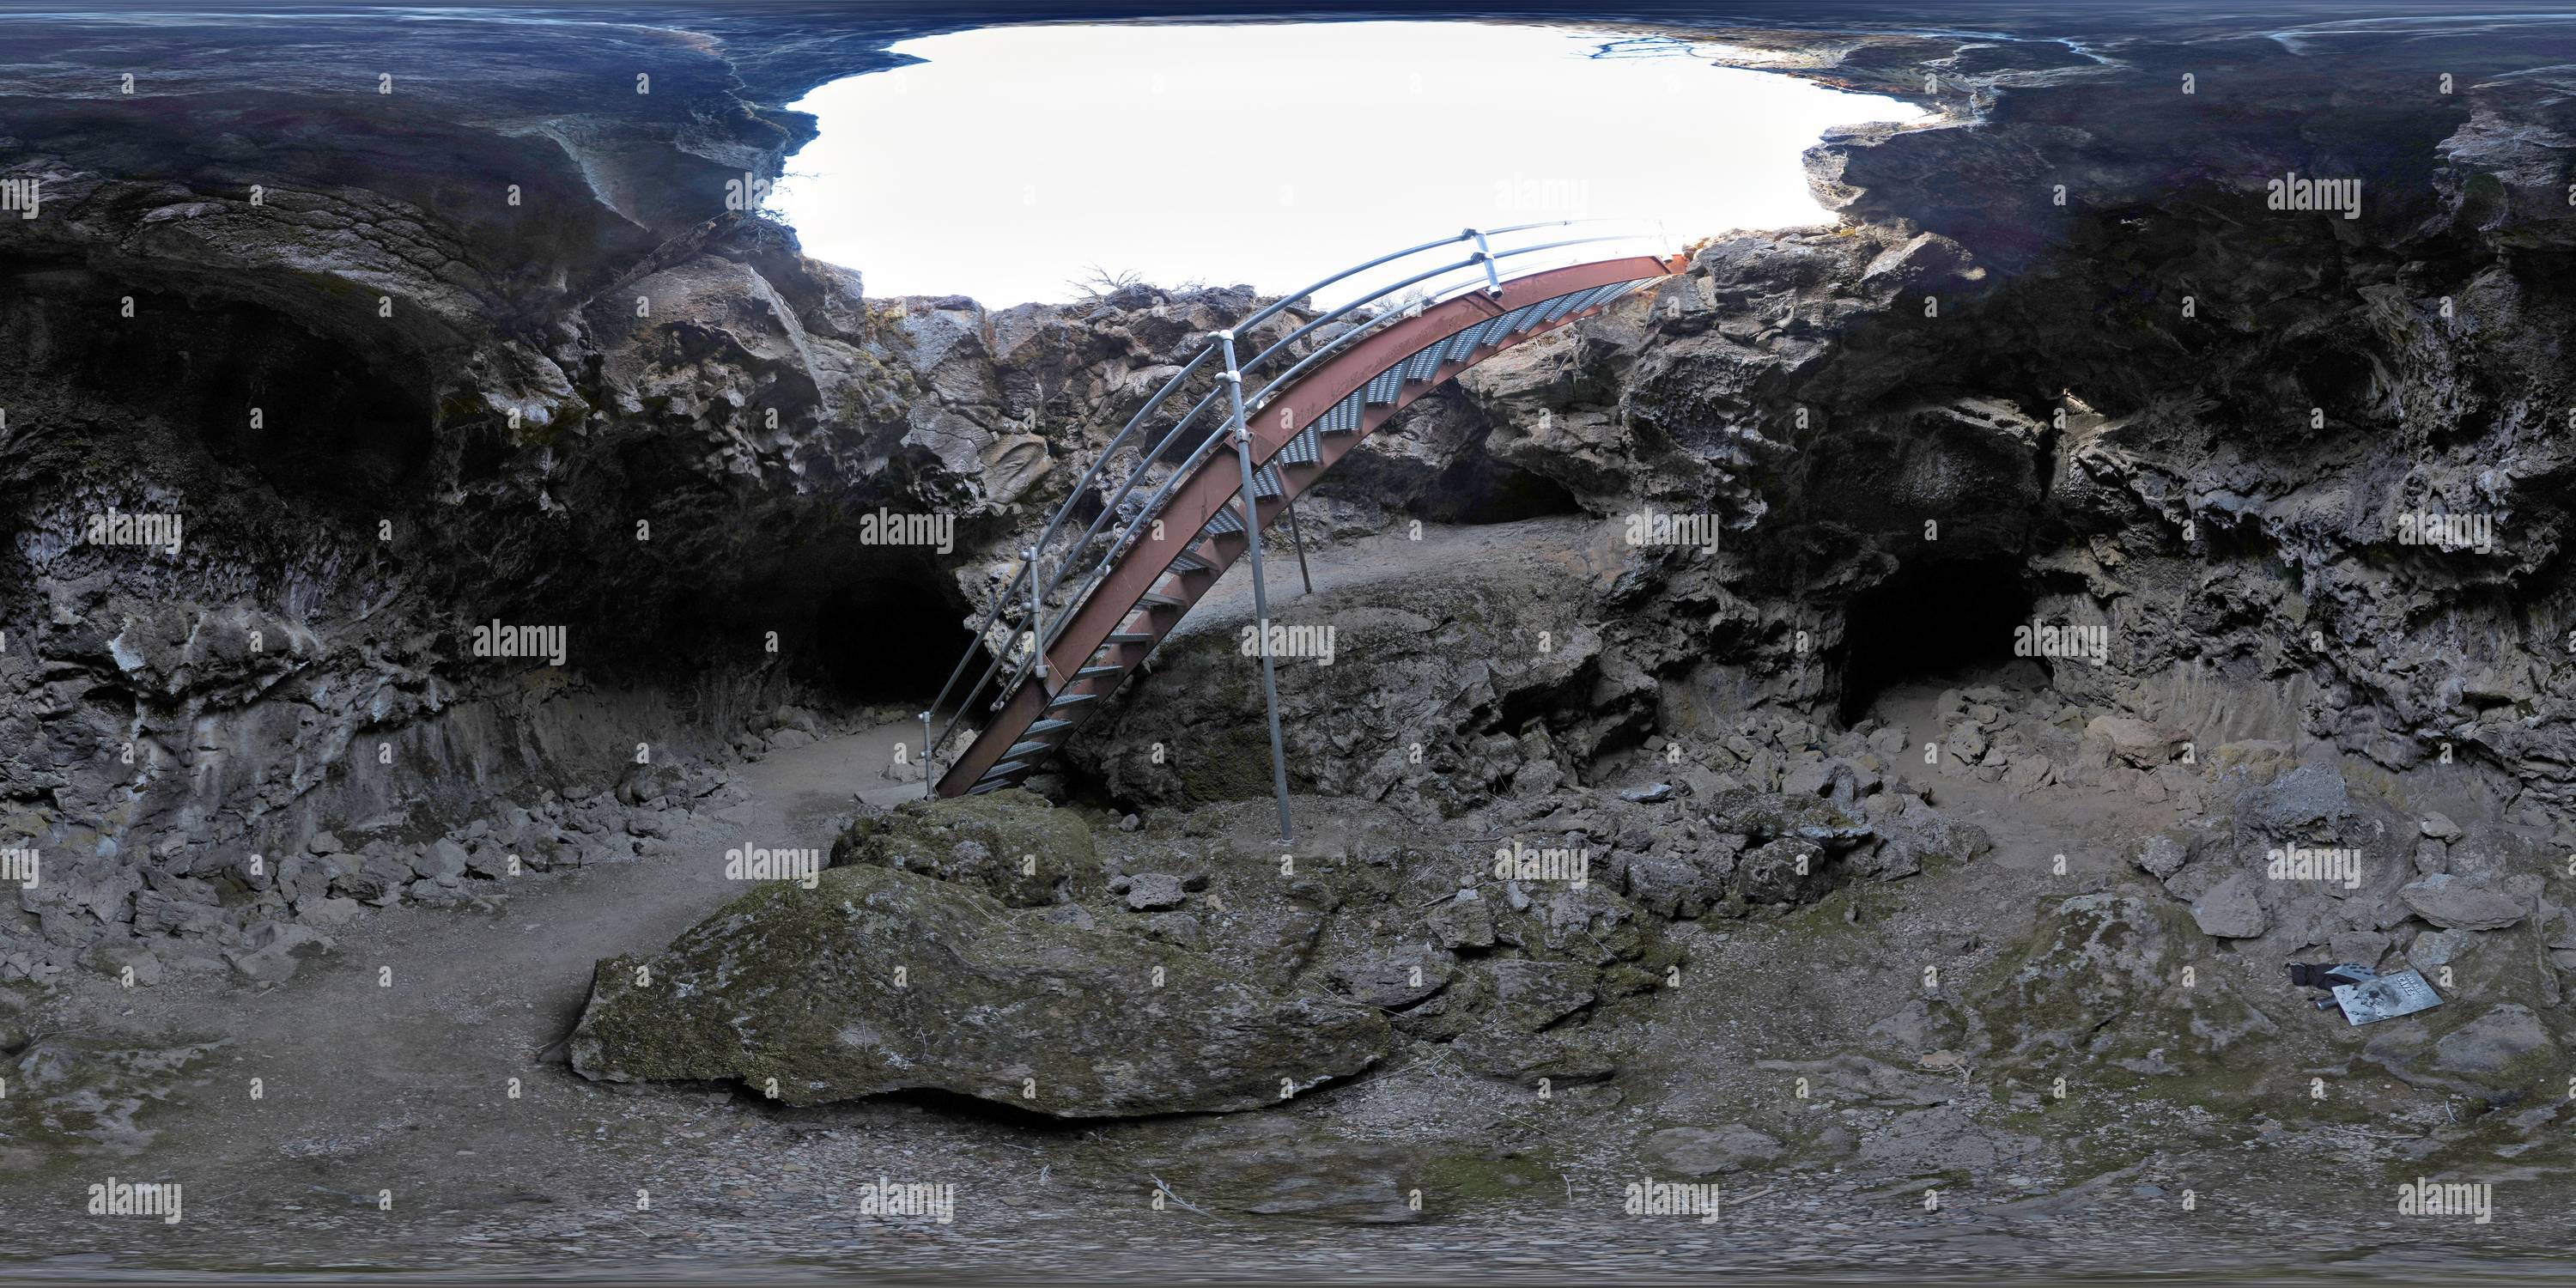 360 degree panoramic view of LBNM: Blue Grotto Cave